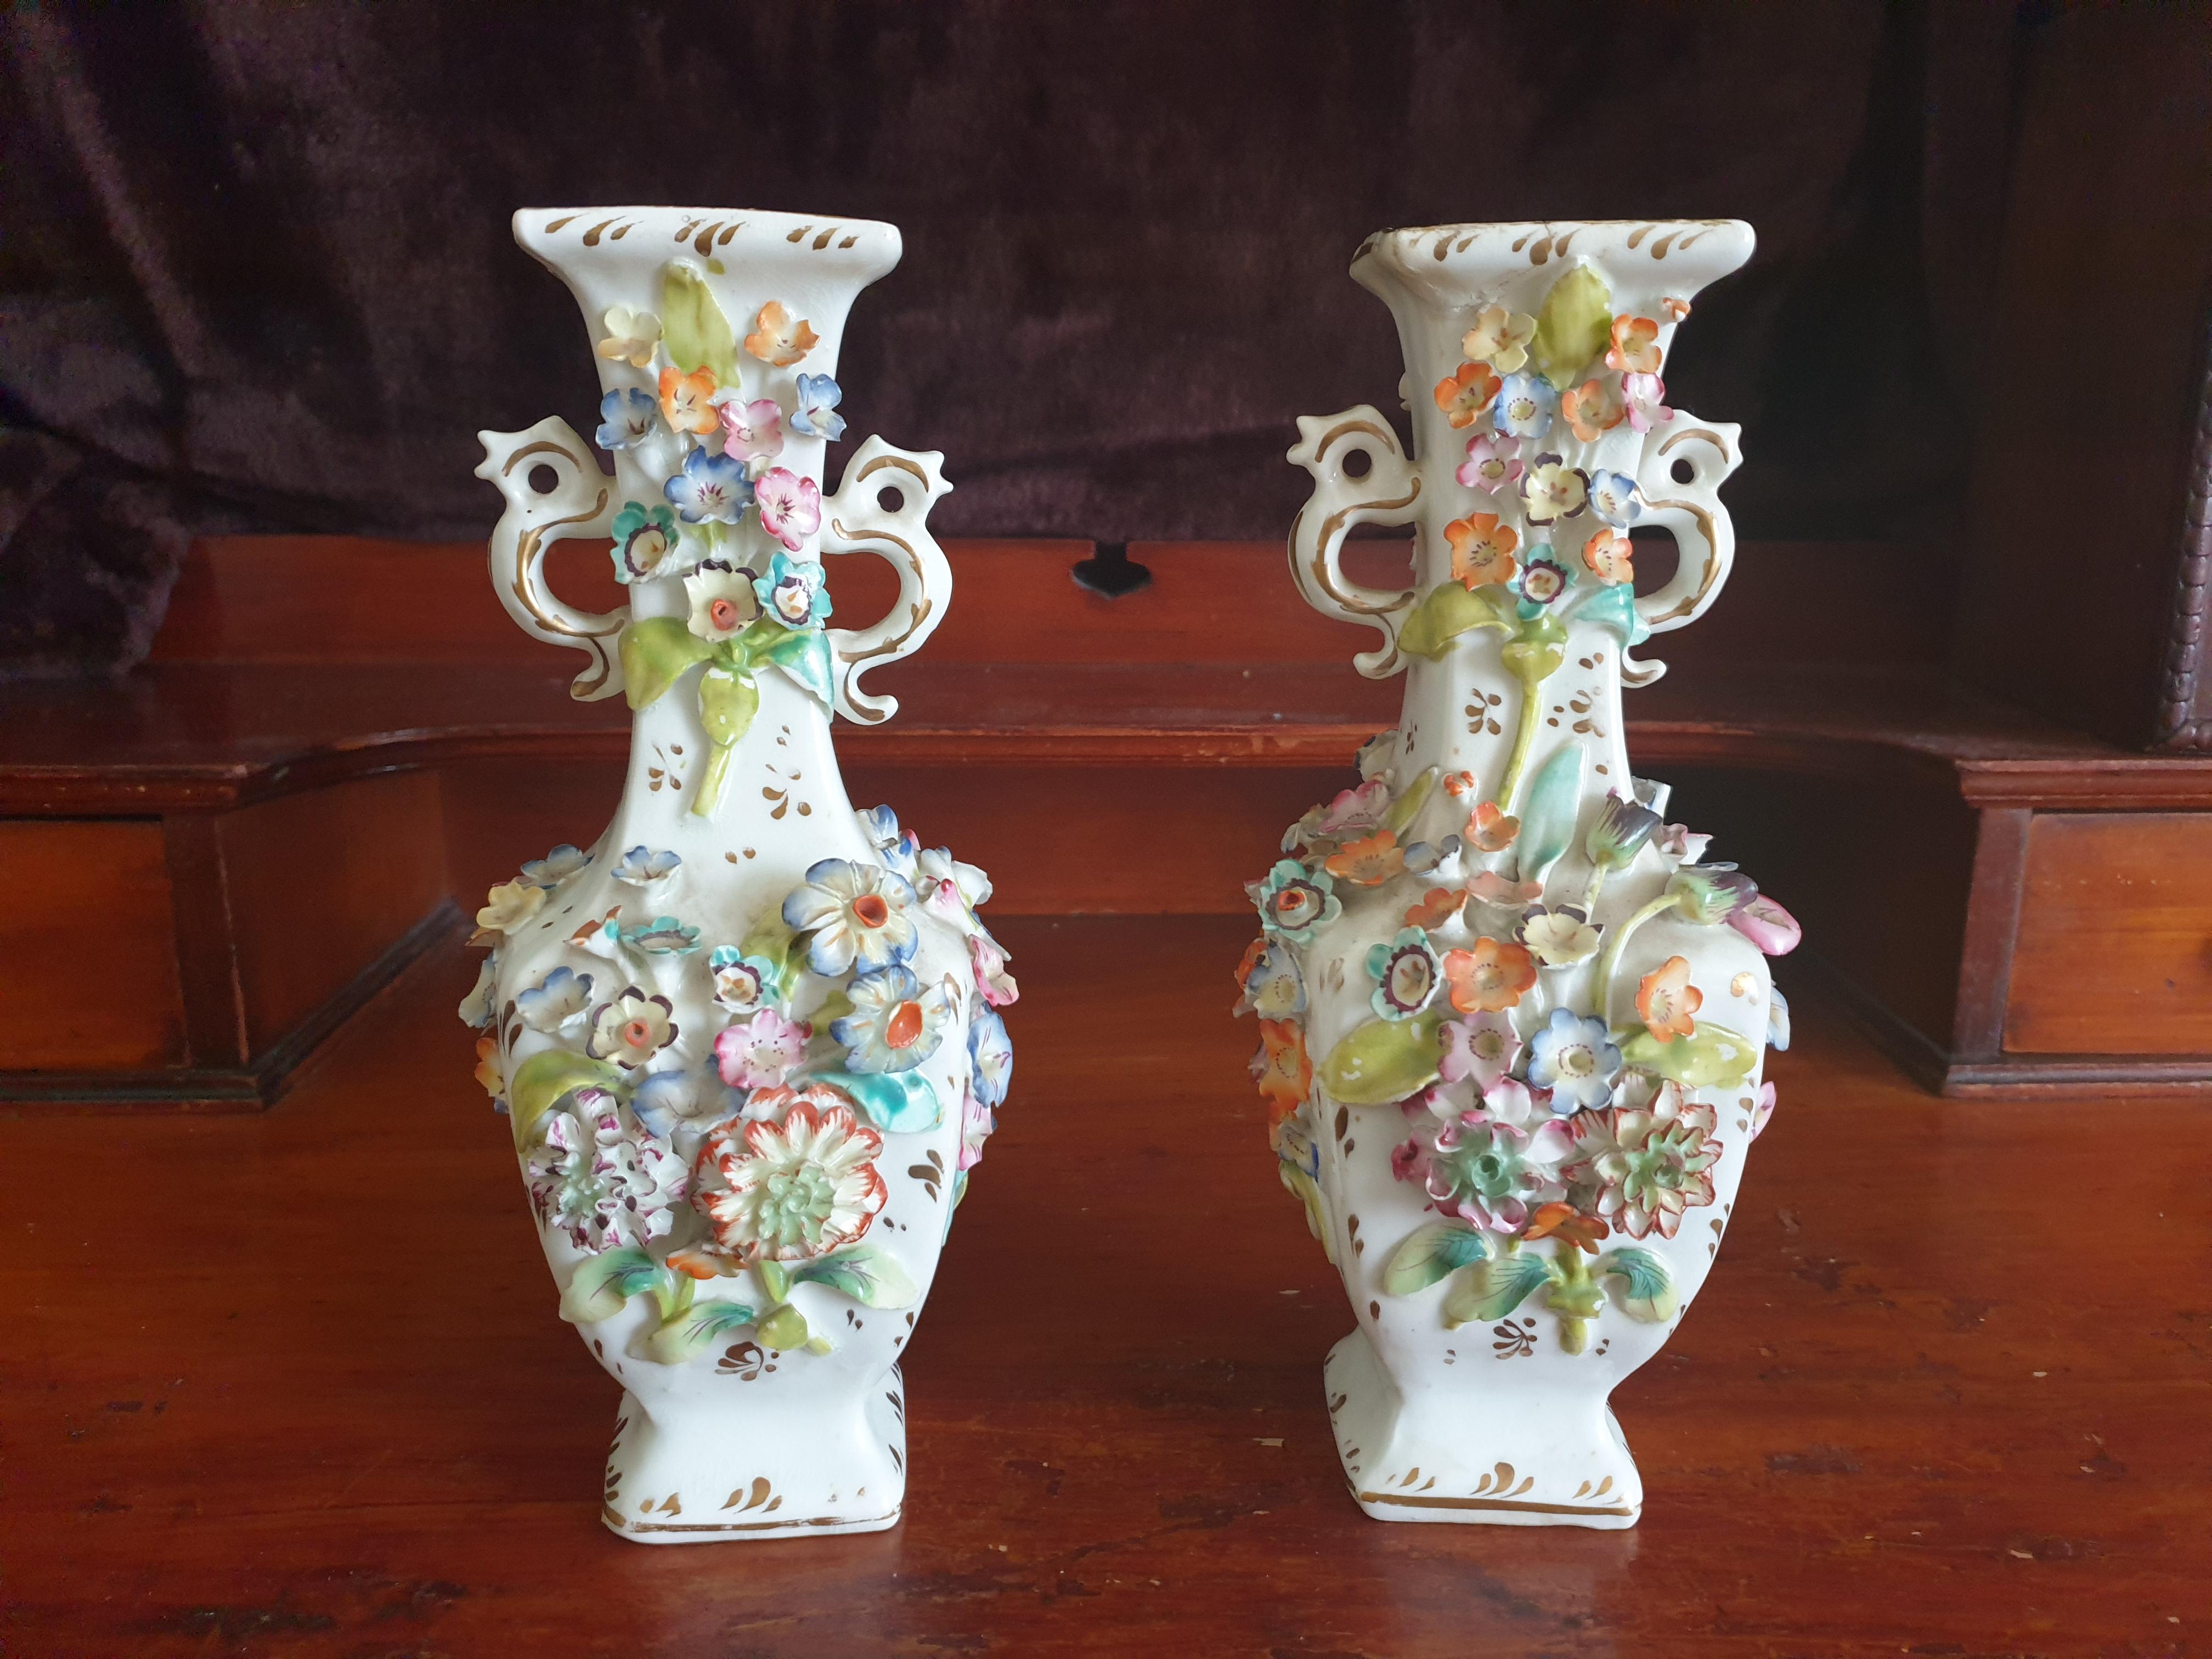 A stunning coalport pair of encrusted flower vases twin handled with a variety of flowers. Dates back early 19th century, generally in good condition however a few minor chips to the flowers that are not noticeable, comes with age. Overall condition